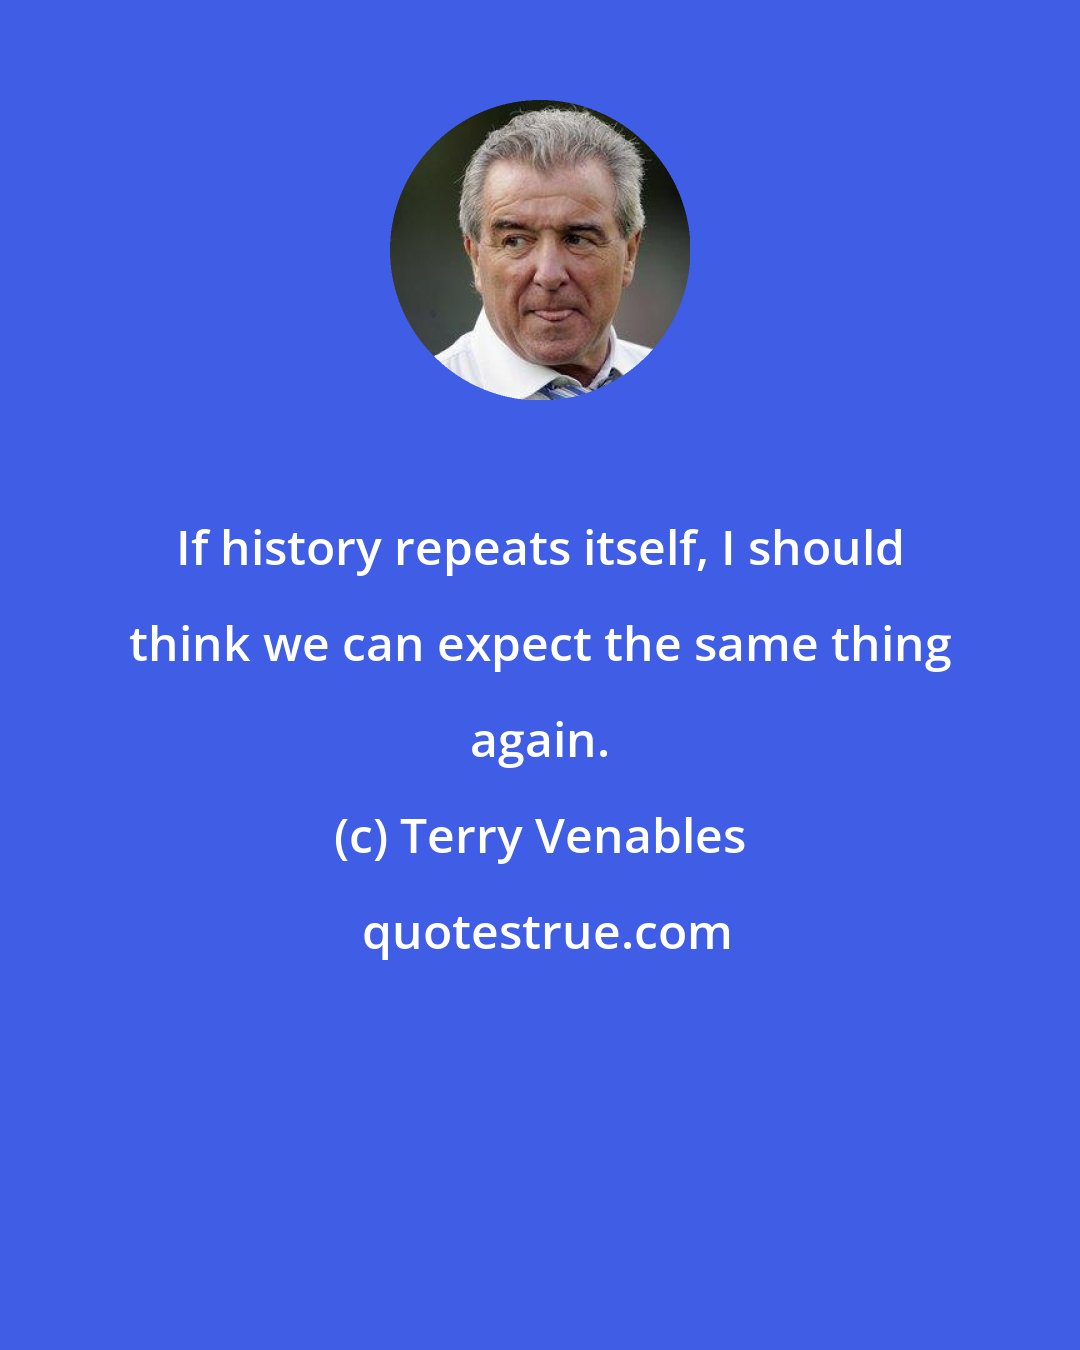 Terry Venables: If history repeats itself, I should think we can expect the same thing again.